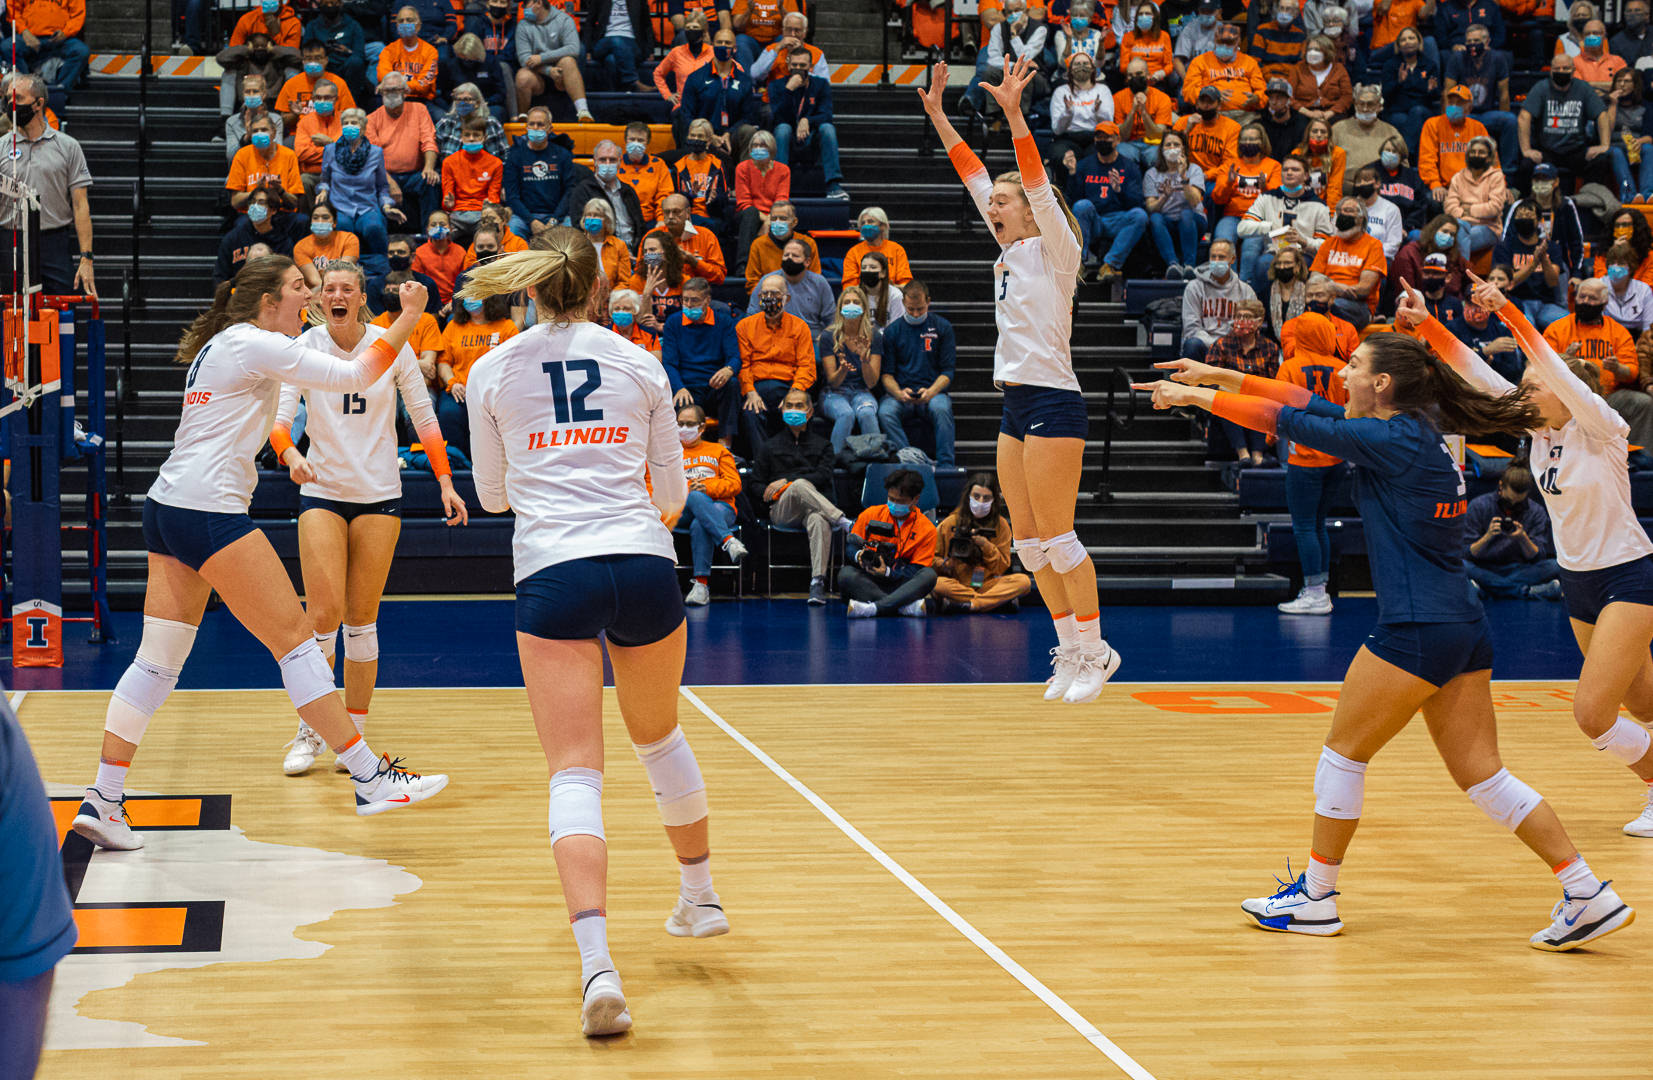 The Illini Womenâ€™s Volleyball team celebrates after winning a point or a game. On the left, three tall, white women in white jerseys move toward the right, where a tall, white woman with a long blonde ponytail is jumping in the air celebrating. On the right, there are two more women pointing in celebration. Both are white; one wears a white jersey, one wears a blue jersey. Photo from the Facebook event page. 